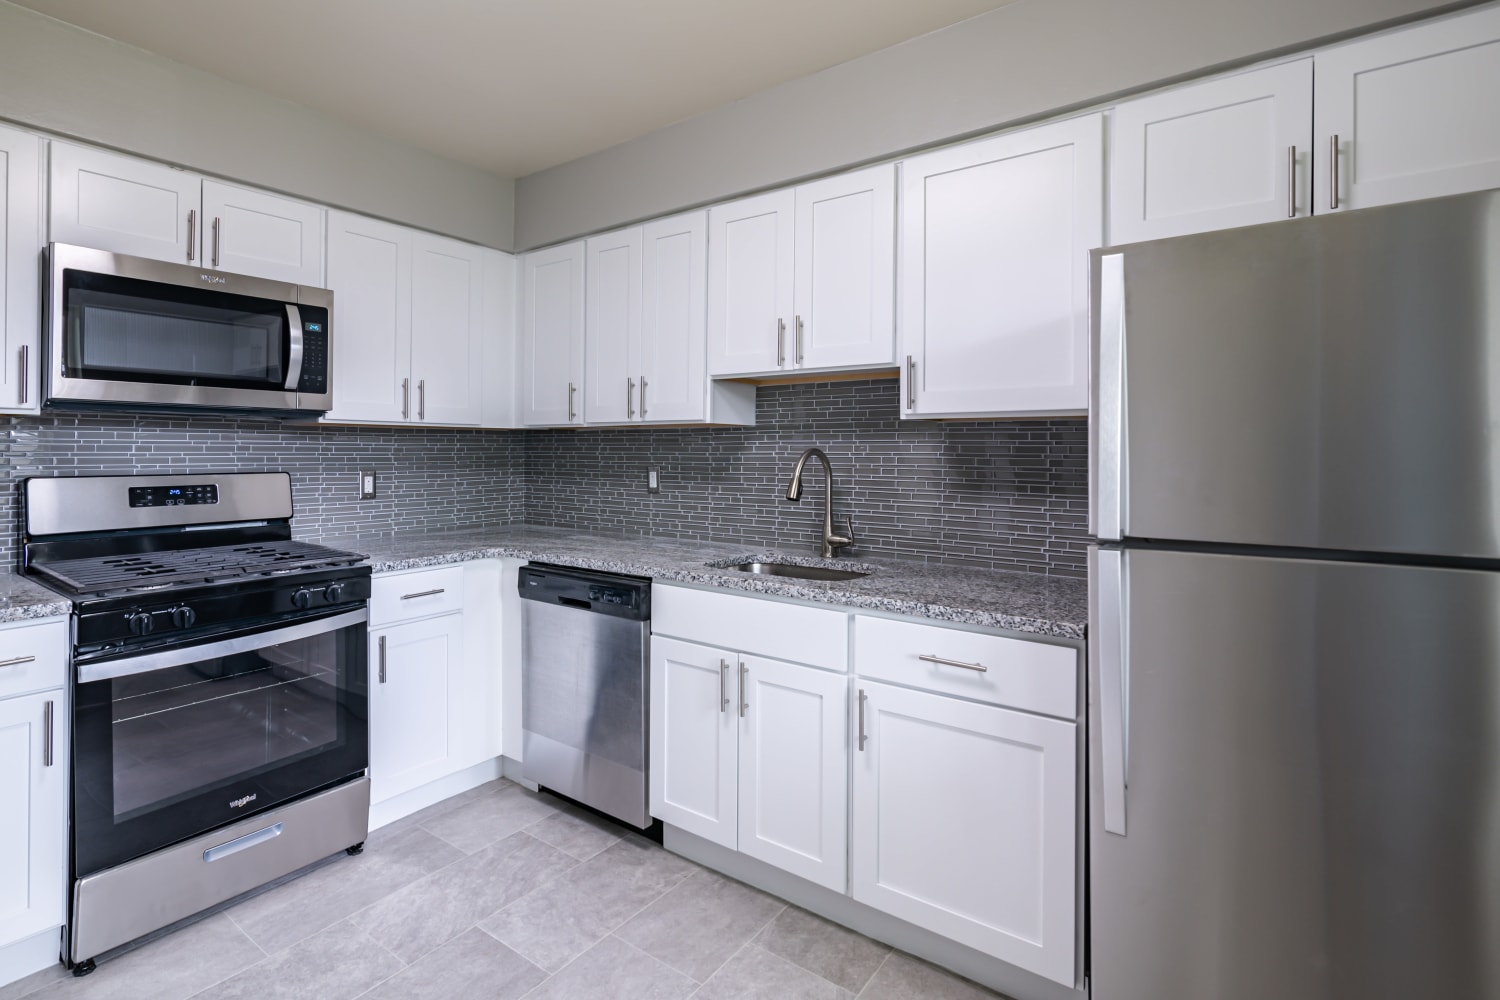 Upgraded kitchen with white cabinets, stainless appliances, and granite countertops